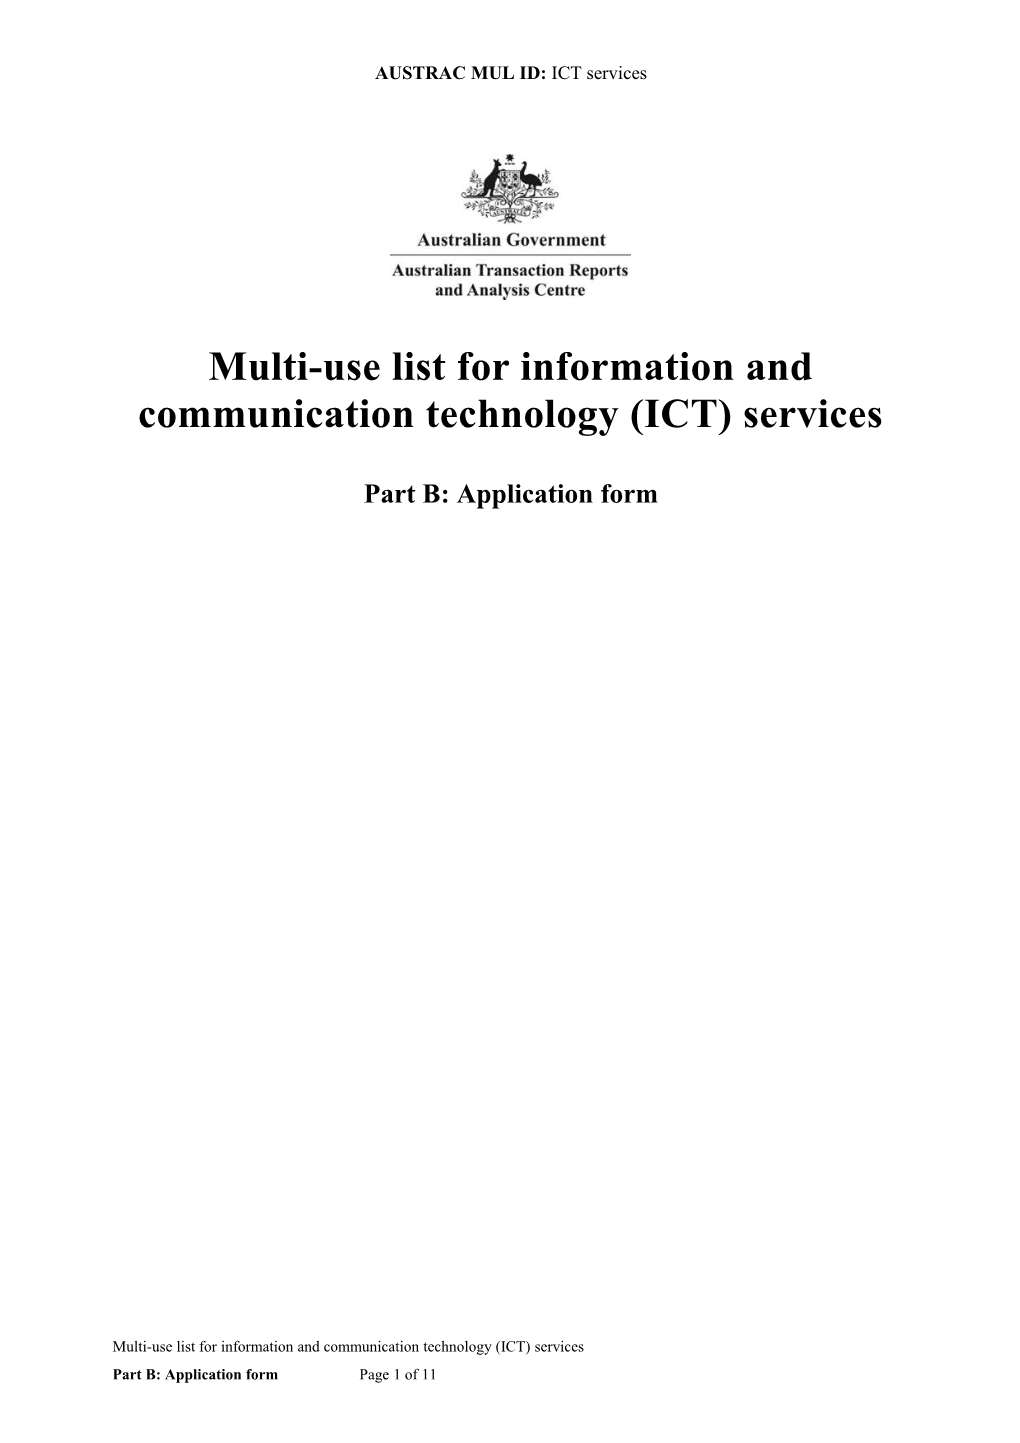 Multi-Use List for Information and Communication Technology (ICT) Services